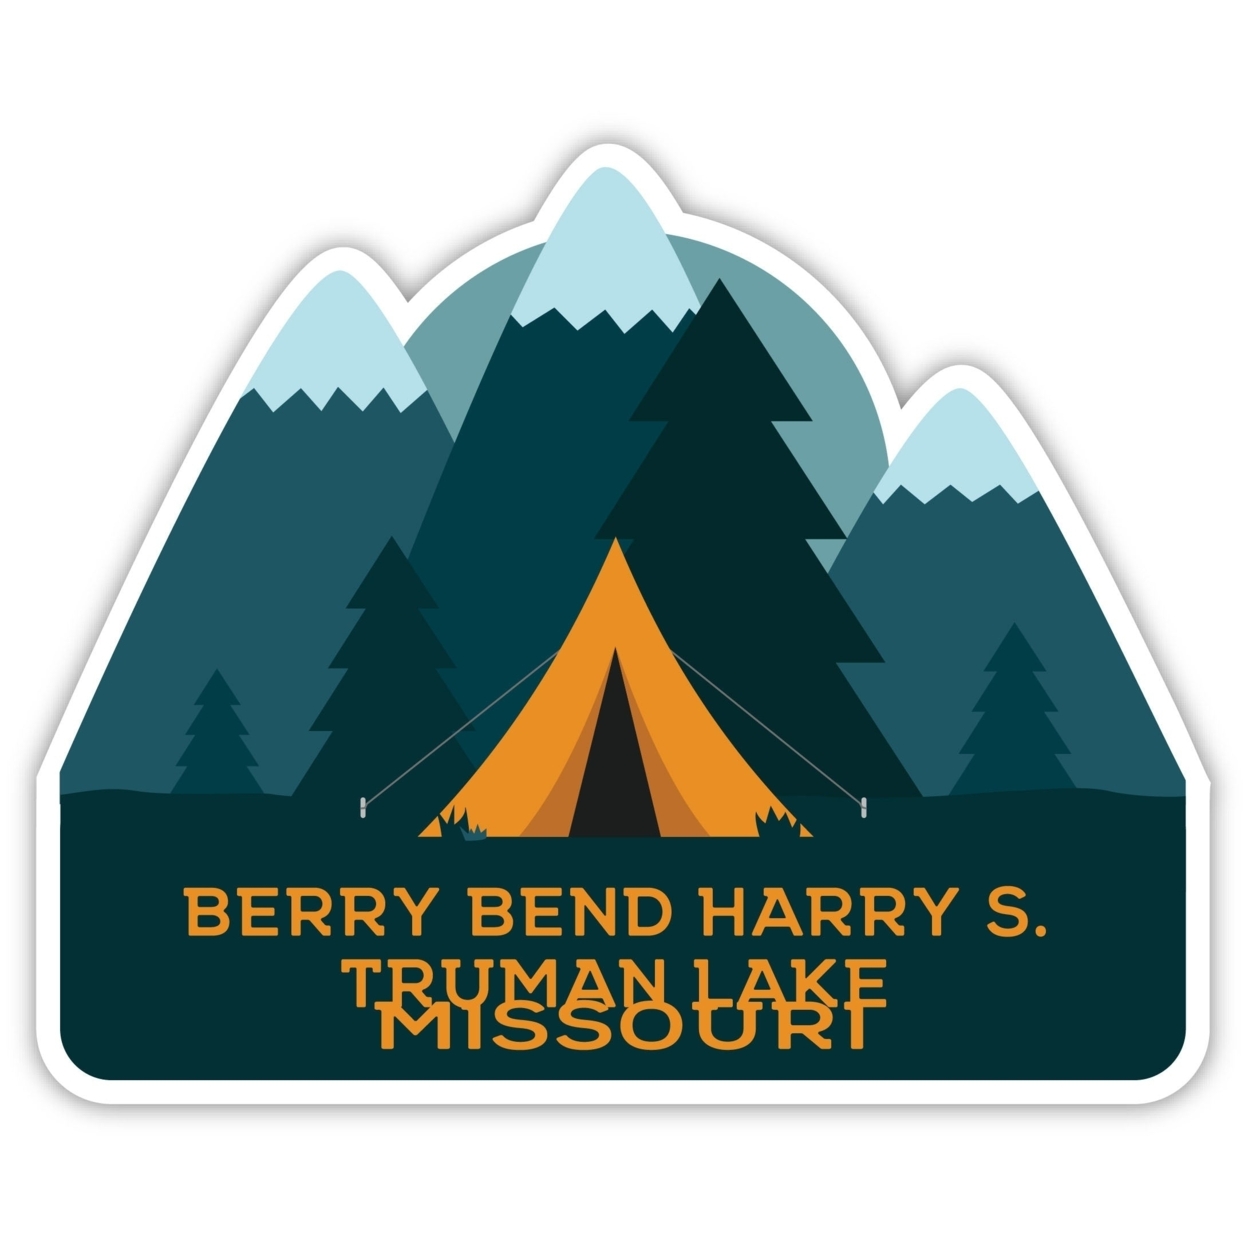 Berry Bend Harry S. Truman Lake Missouri Souvenir Decorative Stickers (Choose Theme And Size) - 4-Pack, 12-Inch, Tent